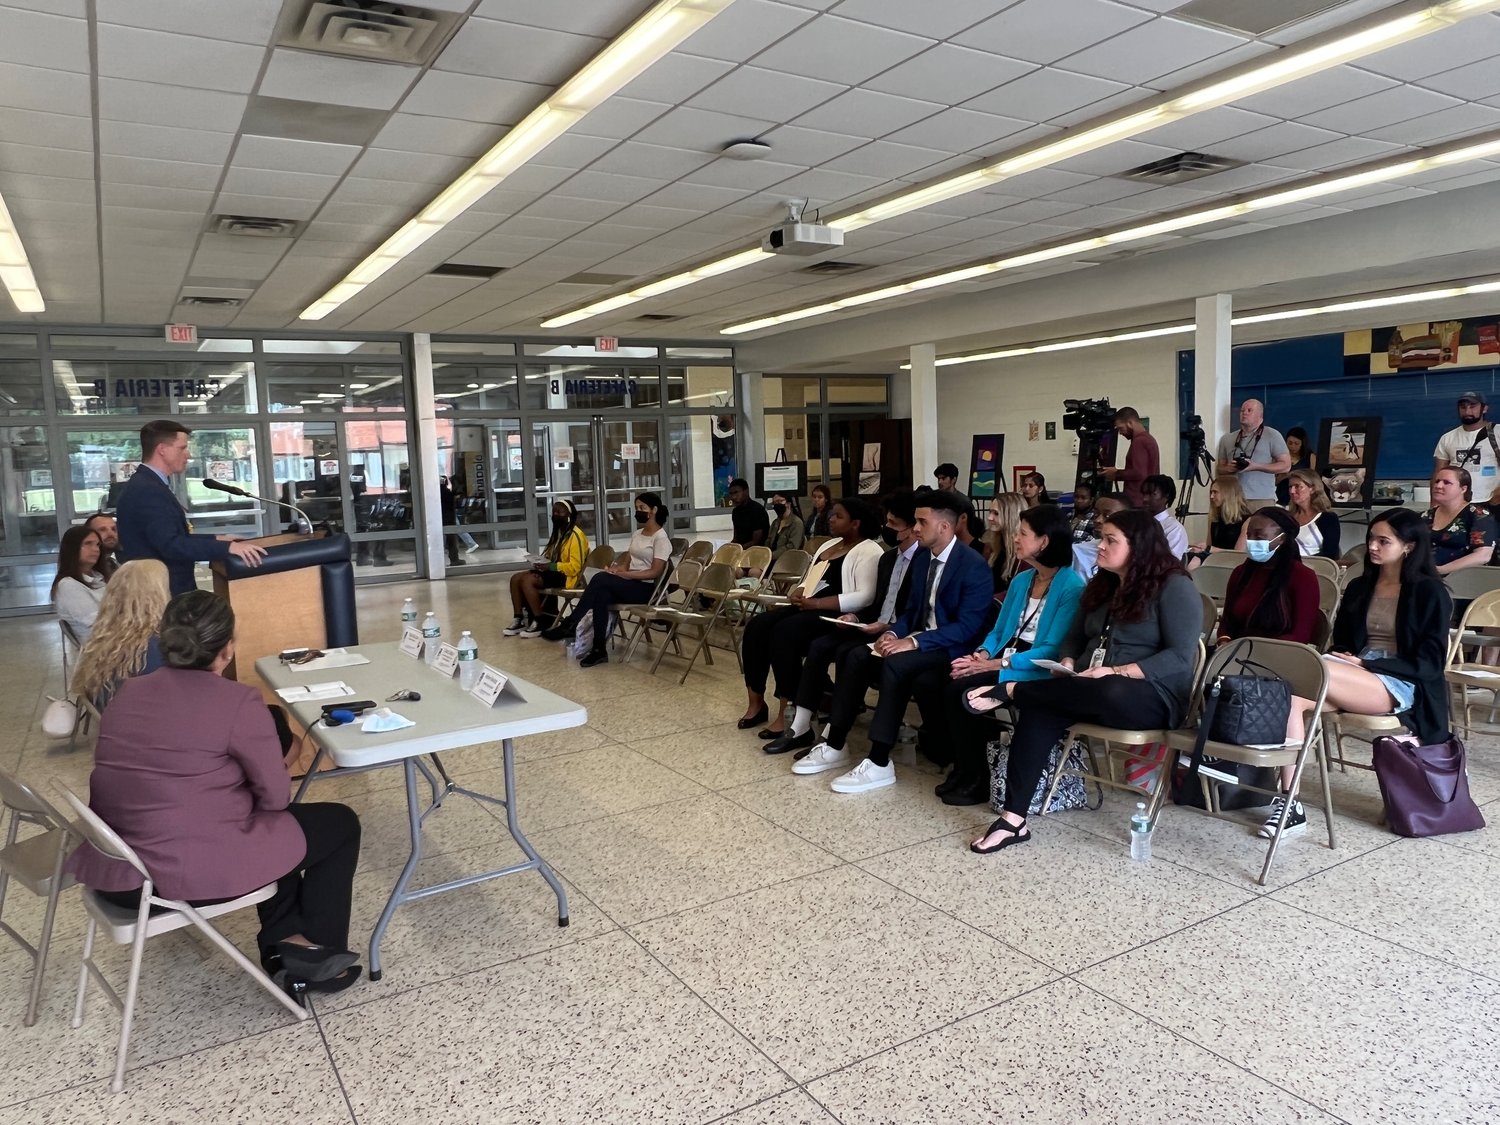 Christopher O’Brien, chief financial officer at Long Island Jewish Valley Stream hospital, thanked the Baldwin High School art students for their contribution to the hospital.